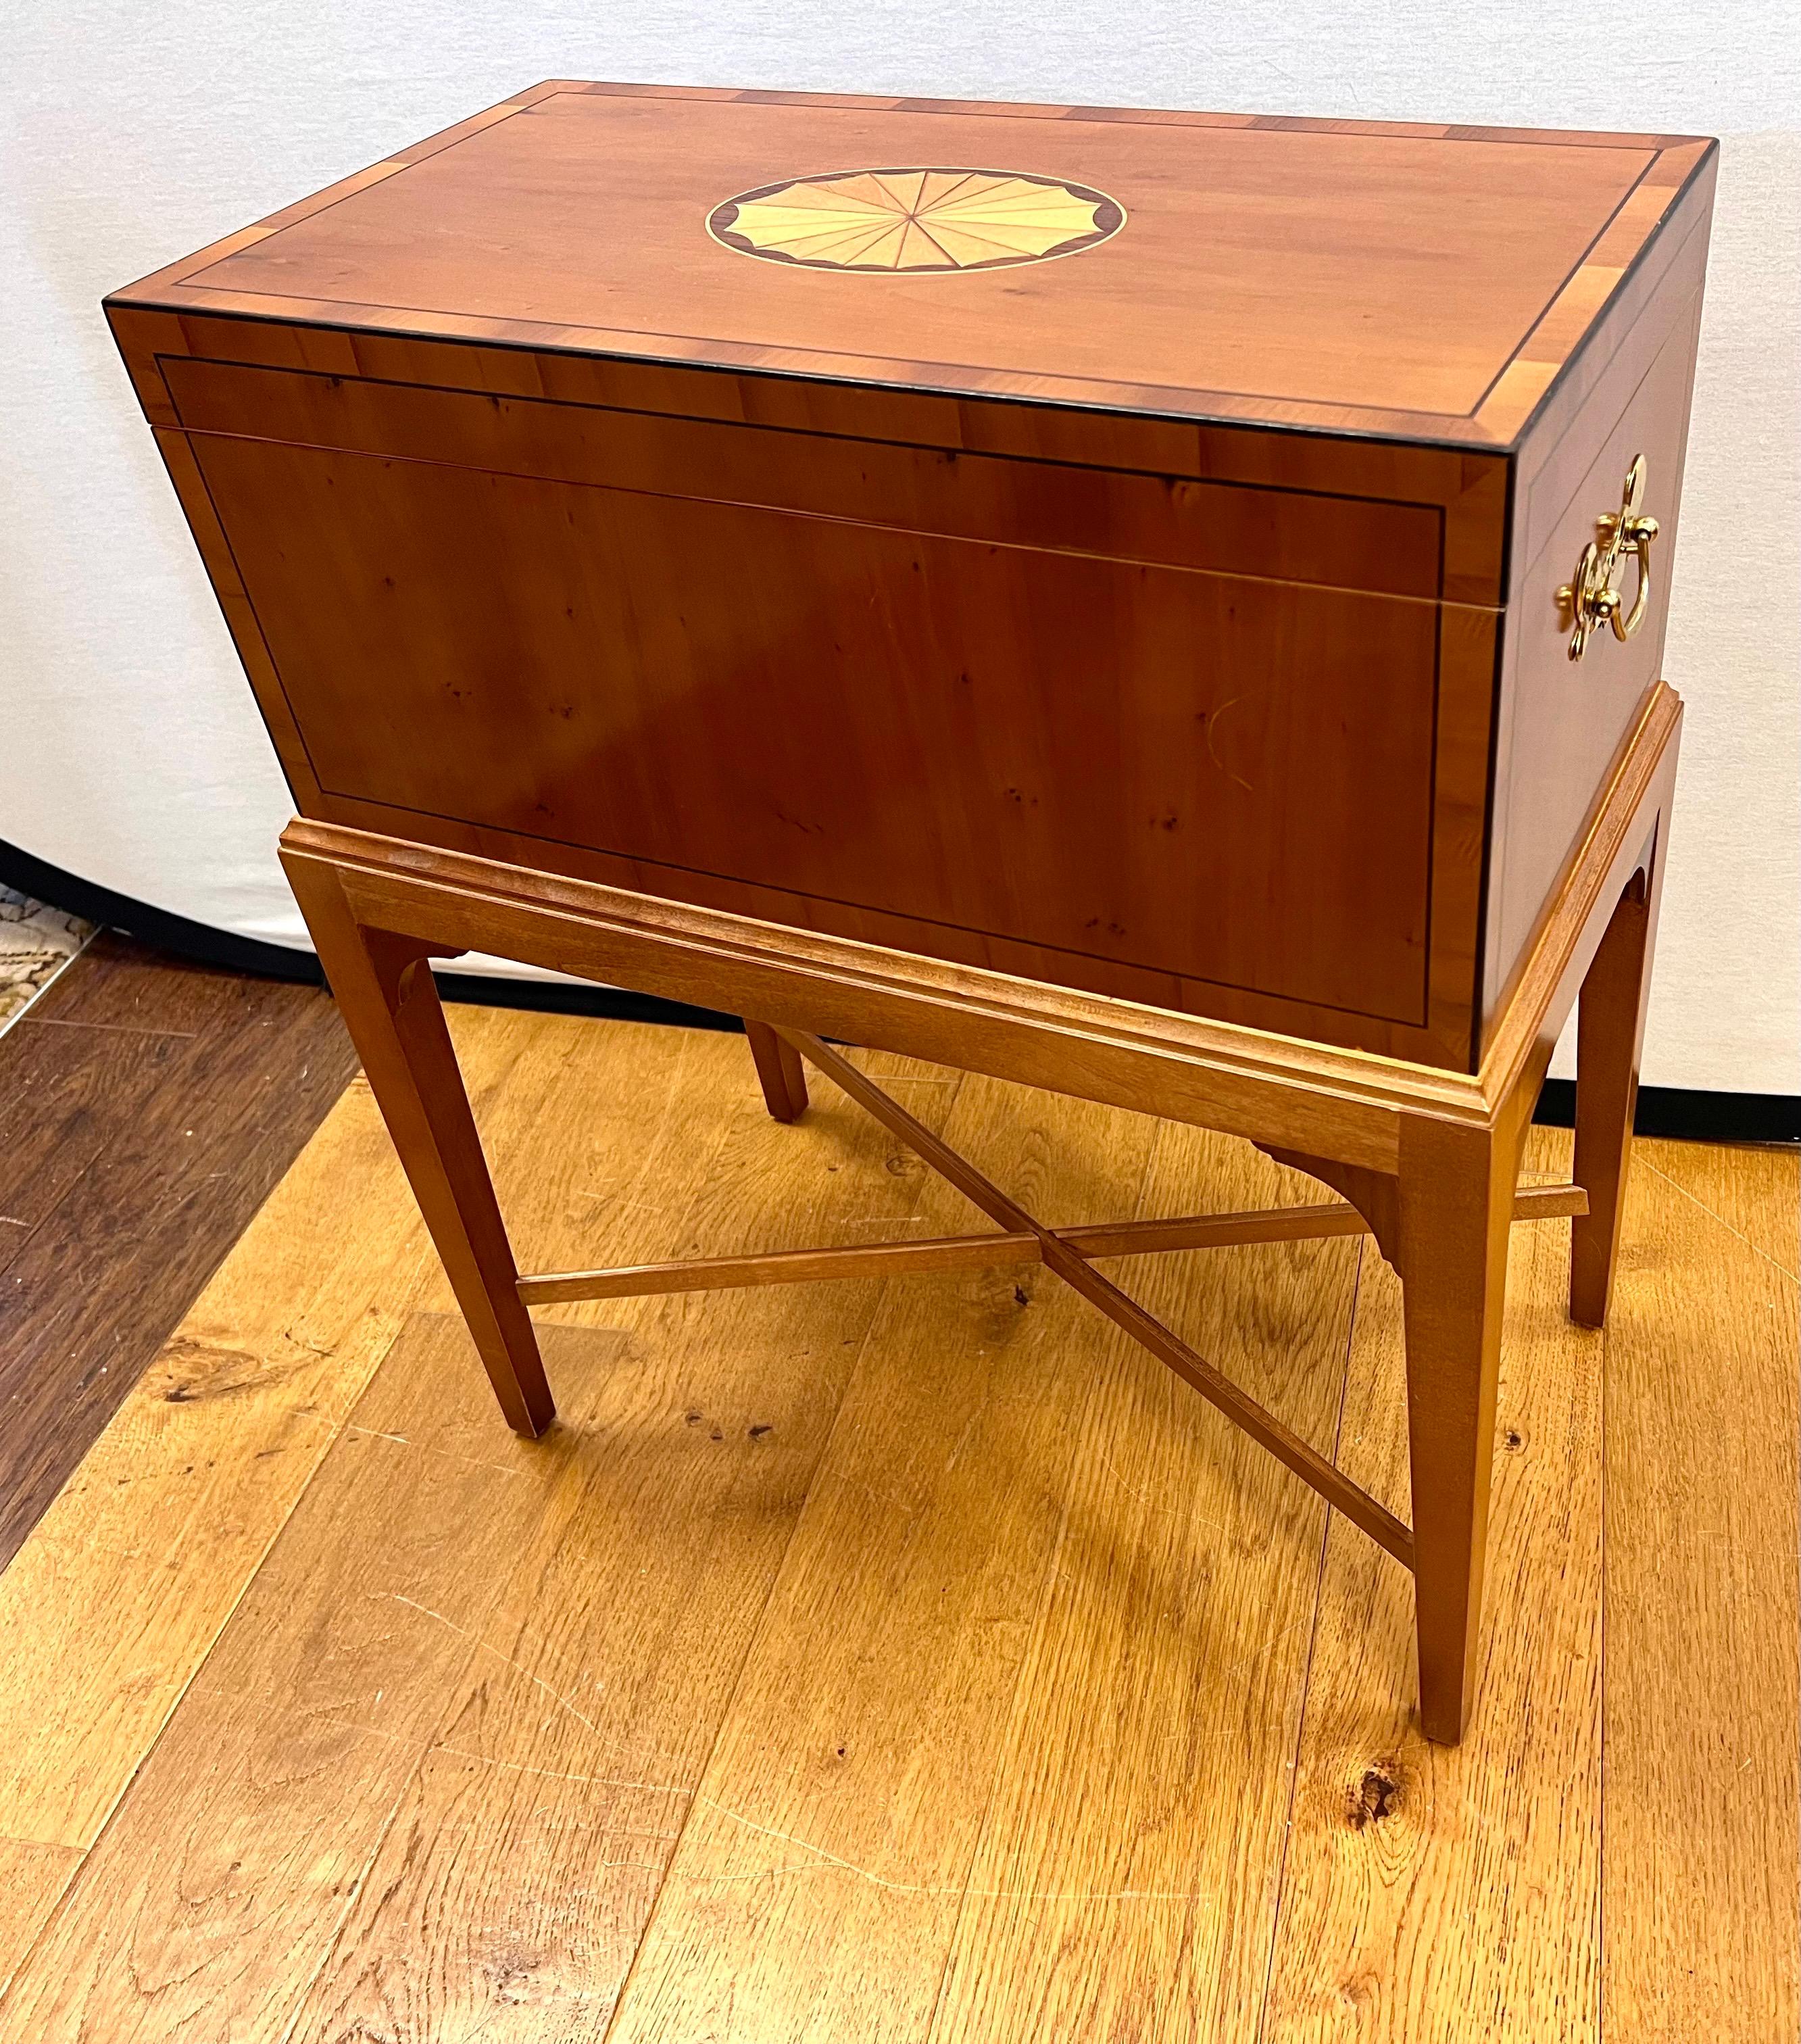 Baker Furniture Mahogany Inlay Table with Small Chest Box on Stand for Storage 1